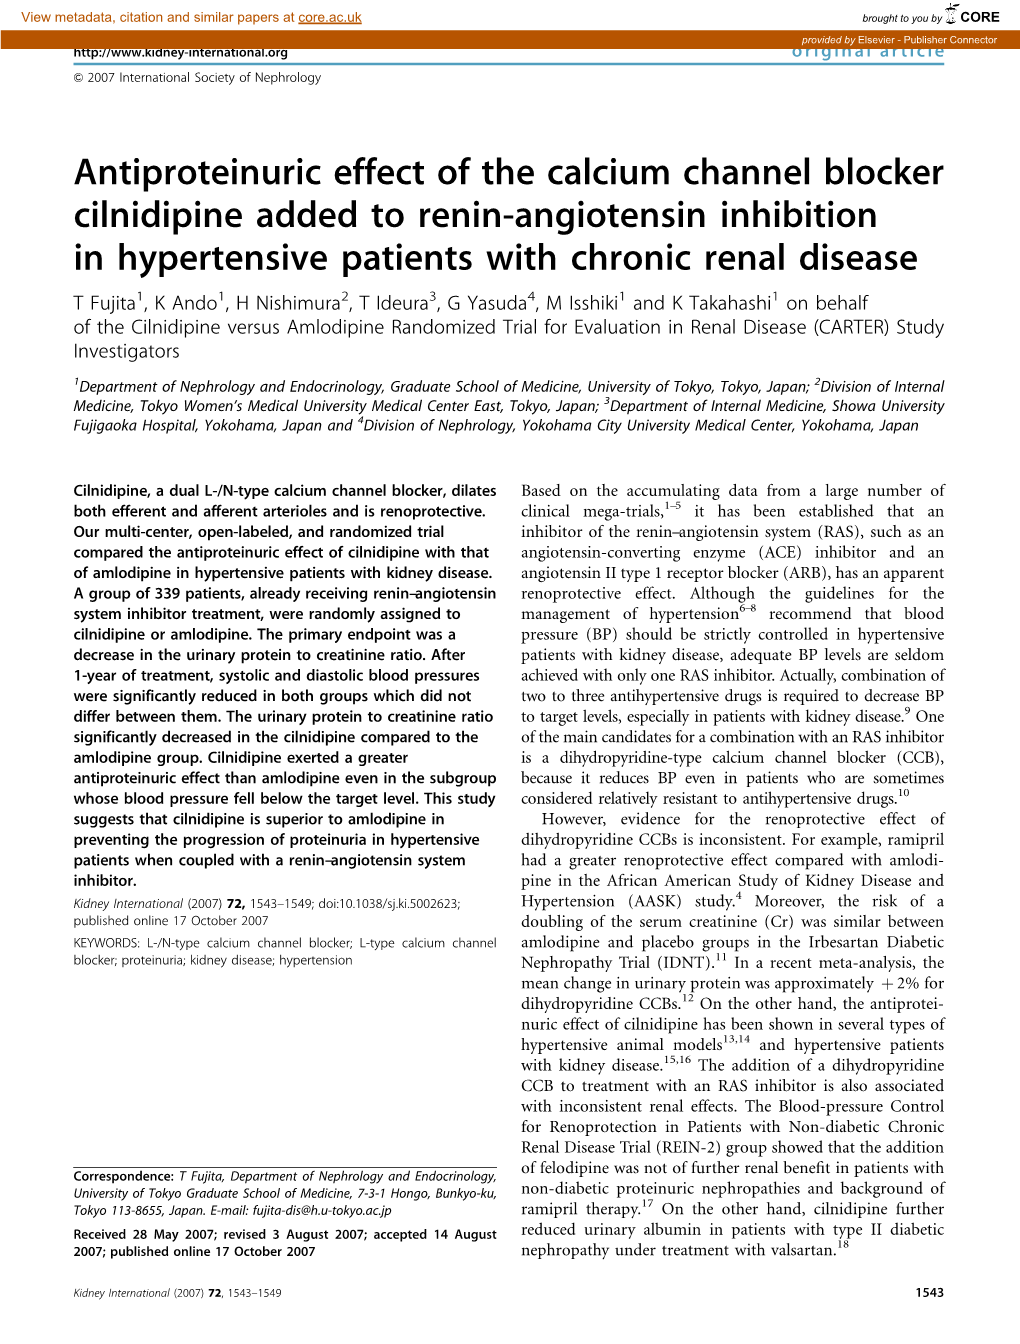 Antiproteinuric Effect of the Calcium Channel Blocker Cilnidipine Added